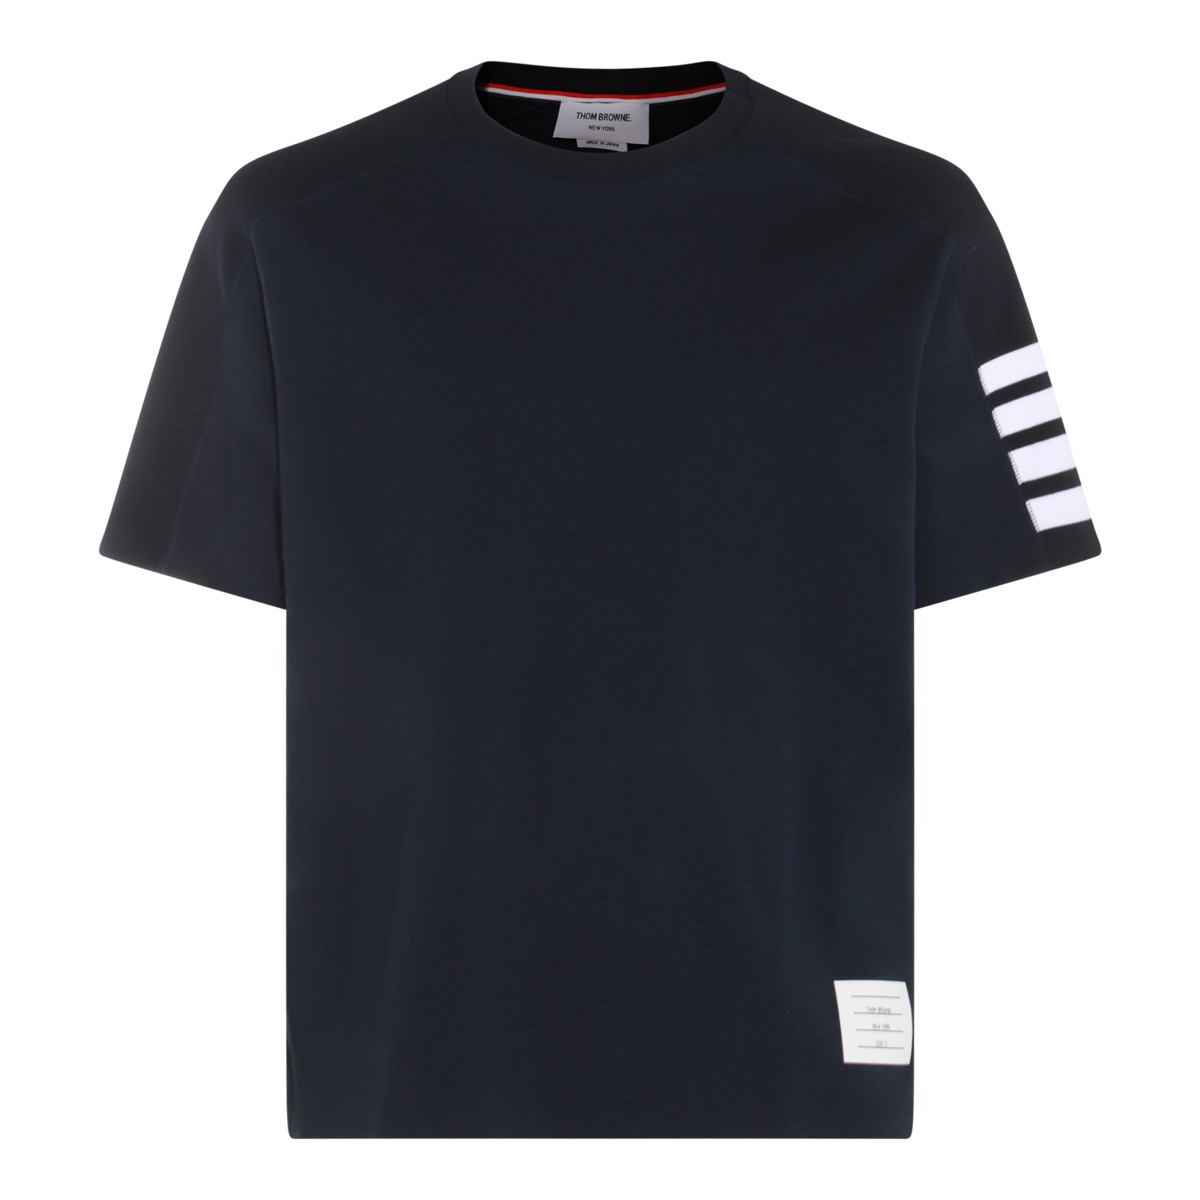 NAVY BLUE AND WHITE COTTON T-SHIRT